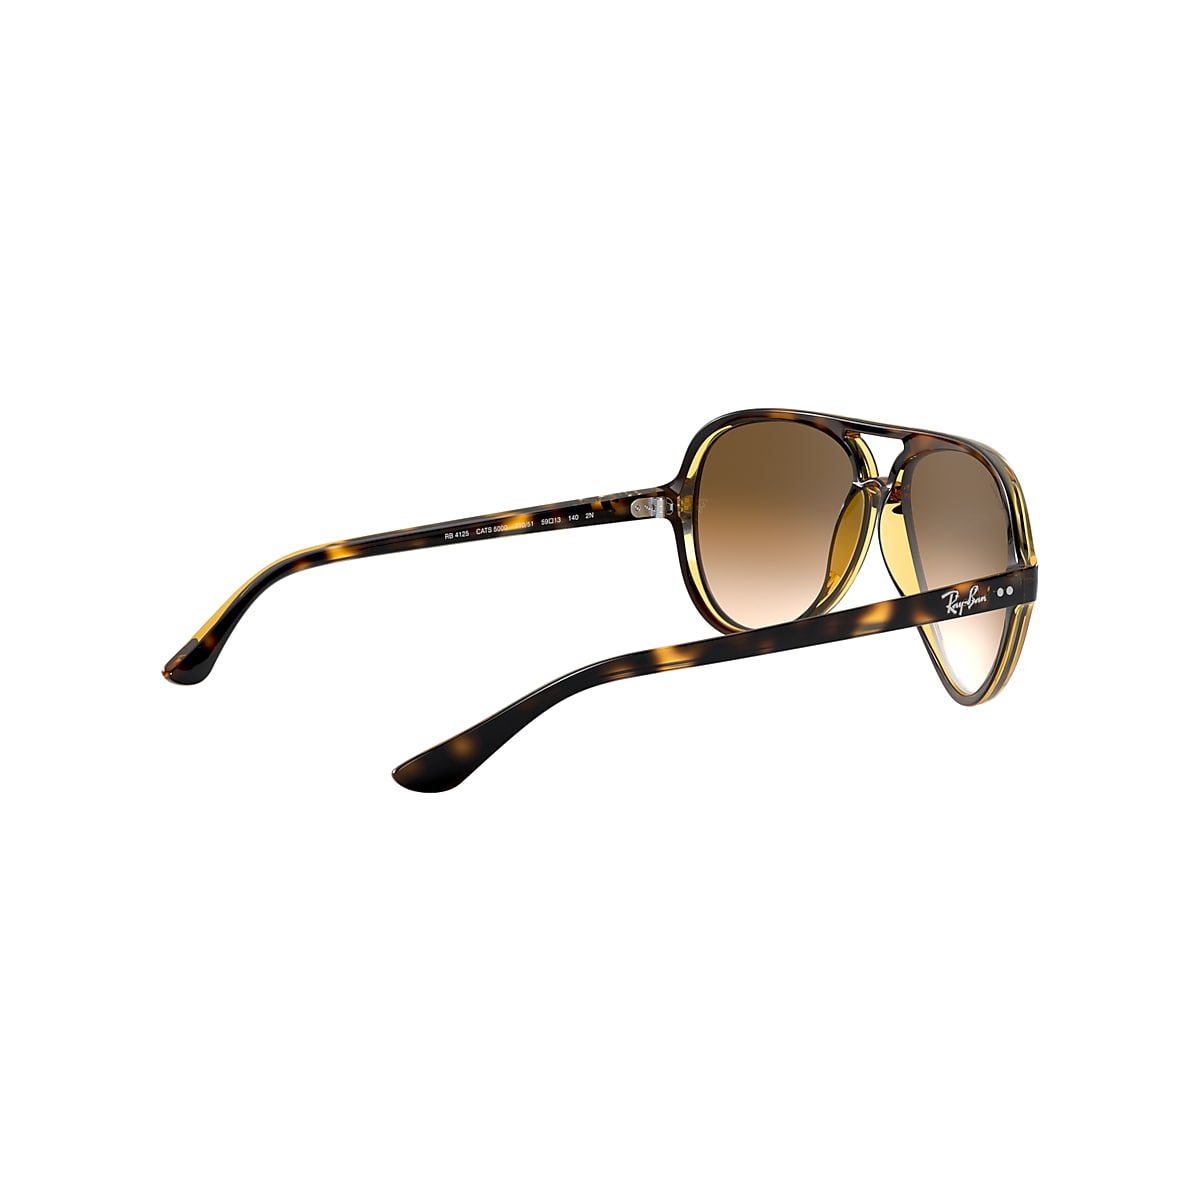 Conflict De lucht Geven Cats 5000 Classic Sunglasses in Light Havana and Light Brown | Ray-Ban®